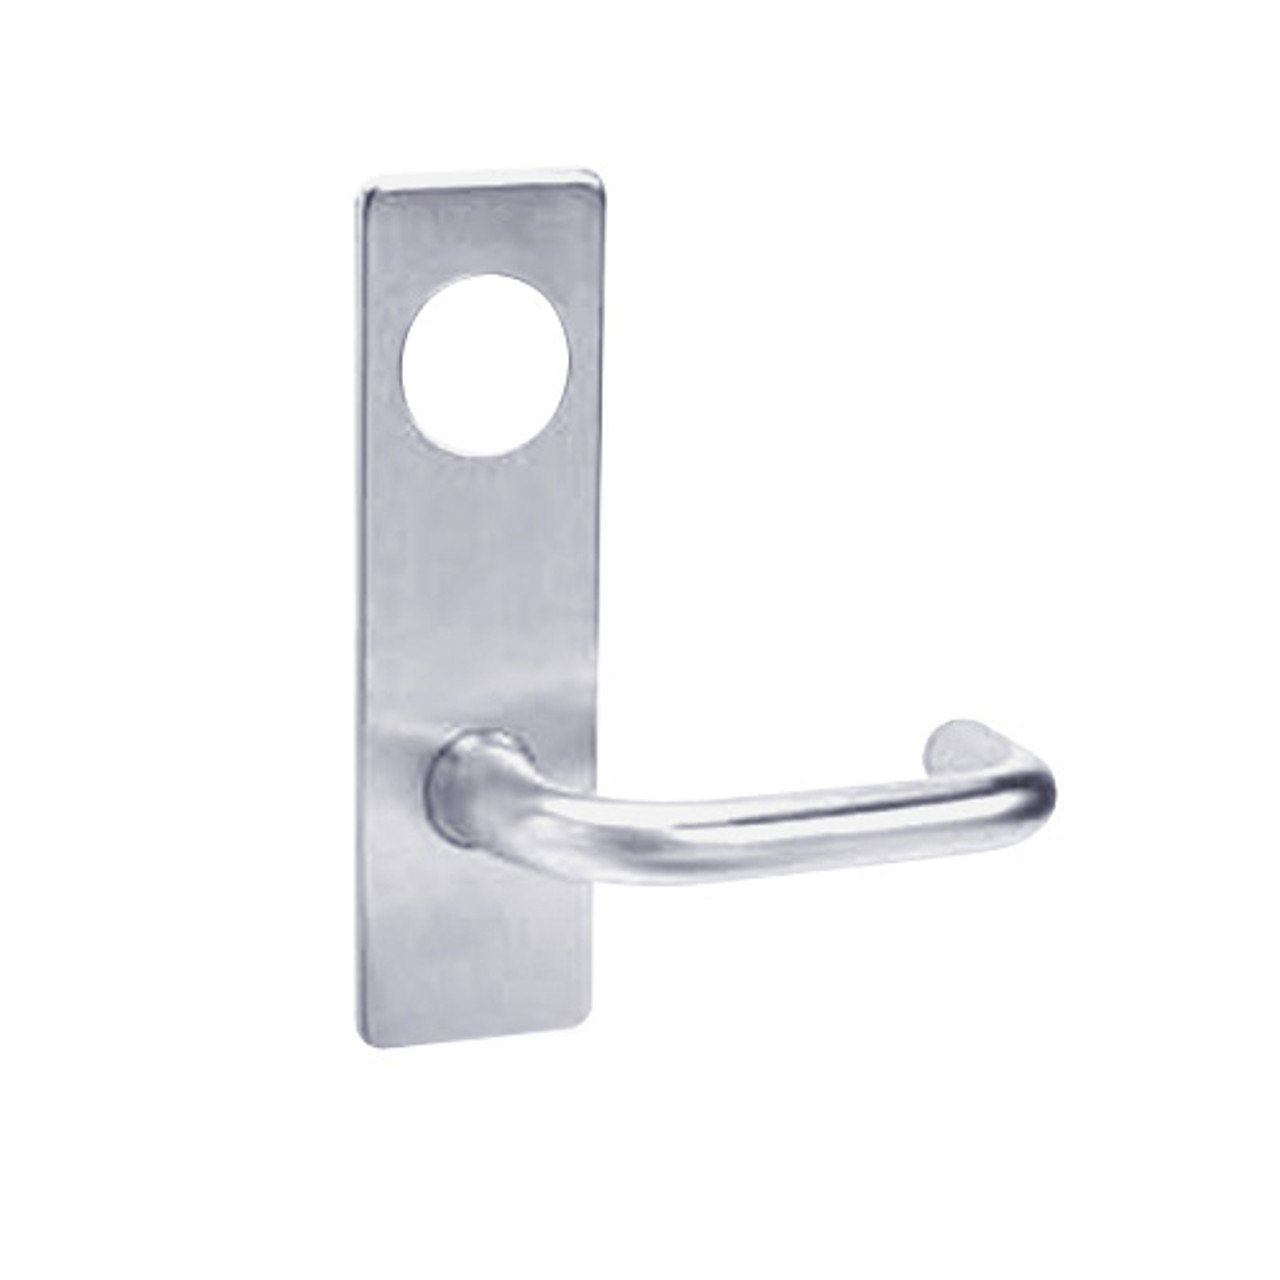 ML2032-LWP-626-M31 Corbin Russwin ML2000 Series Mortise Institution Trim Pack with Lustra Lever in Satin Chrome